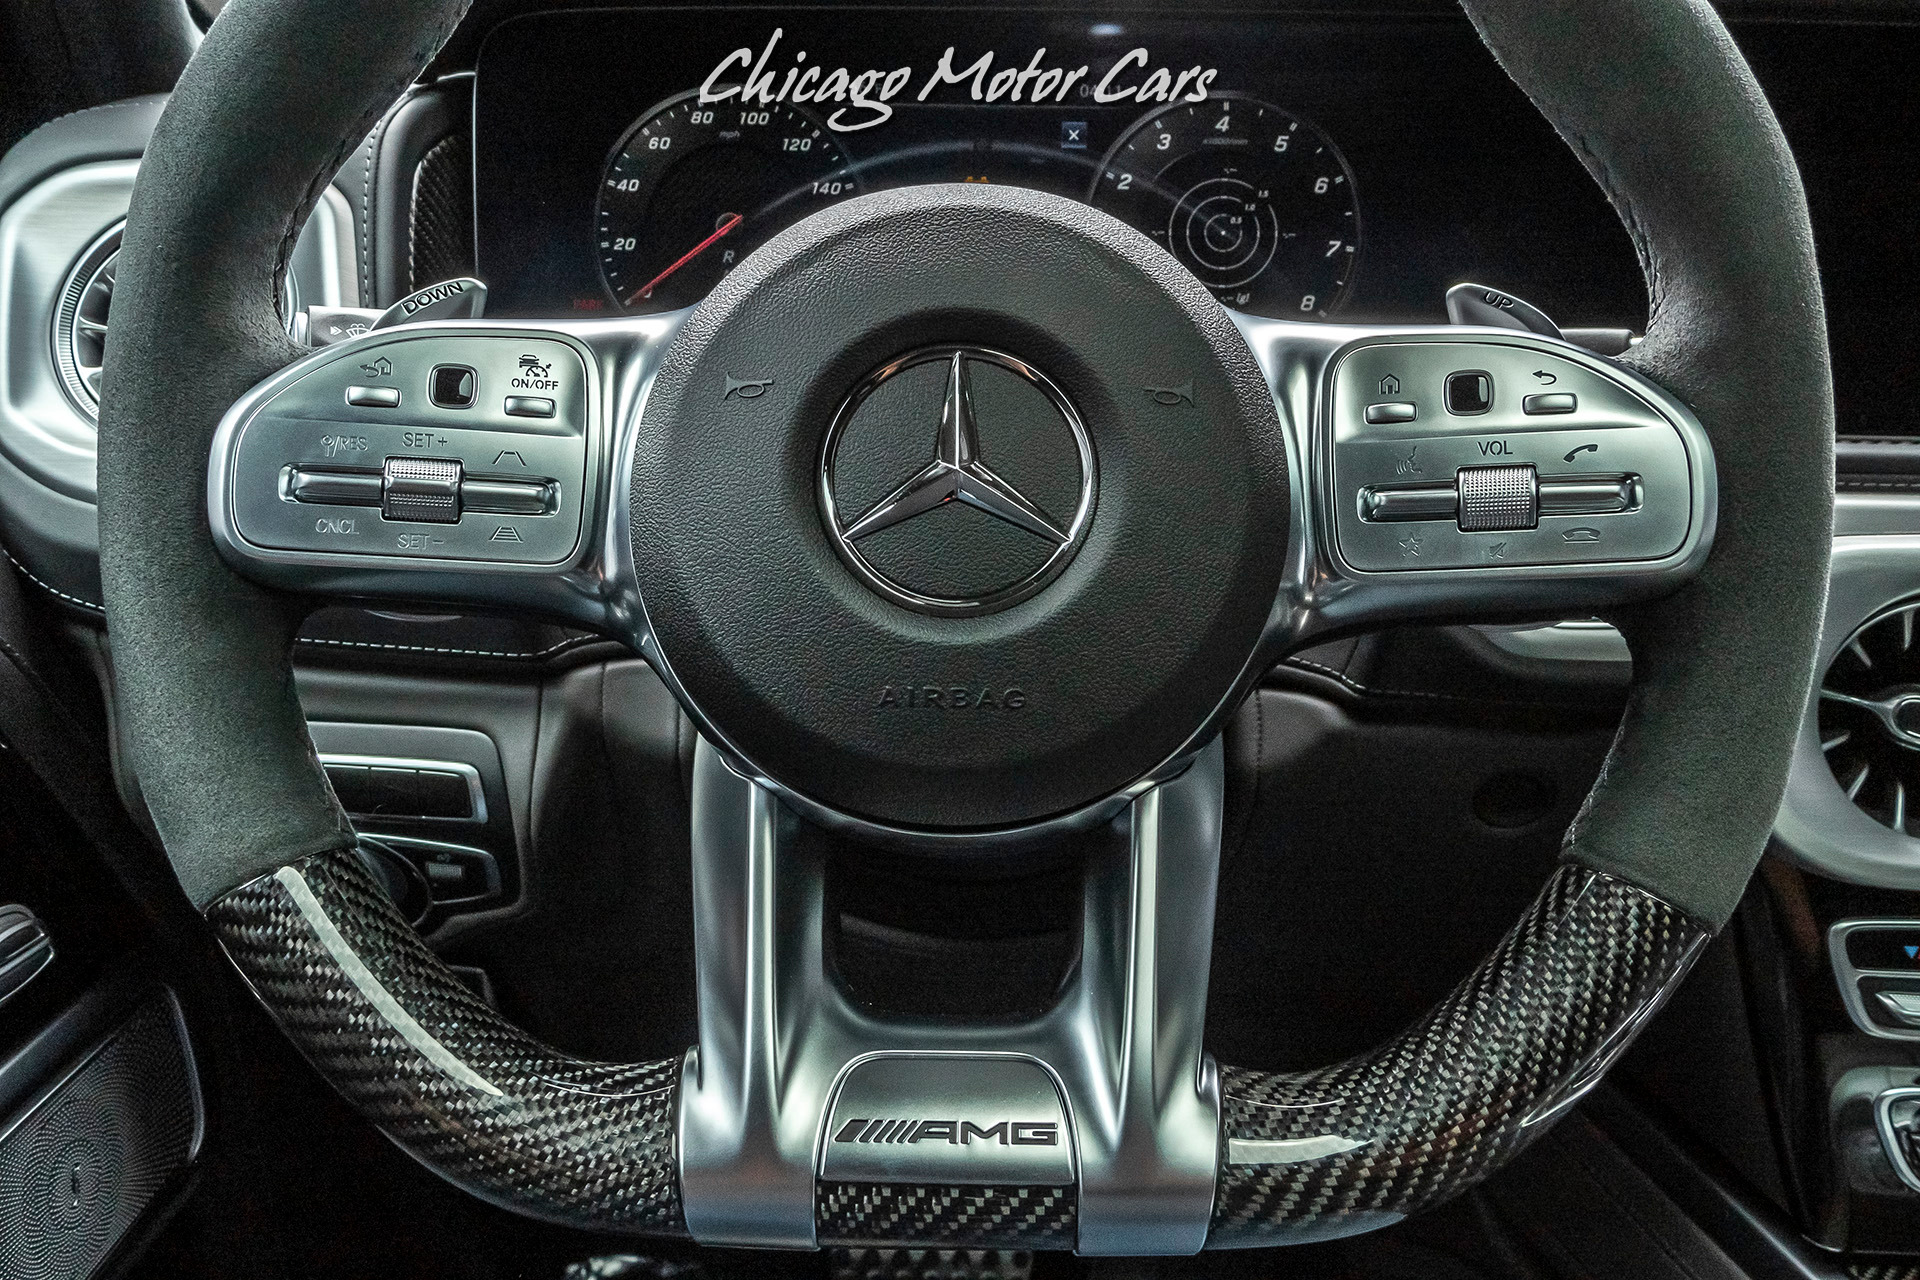 Used-2020-Mercedes-Benz-G63-AMG-4Matic-SUV-Stronger-Than-Time-Edition-RARE-LOADED-Carbon-Fiber